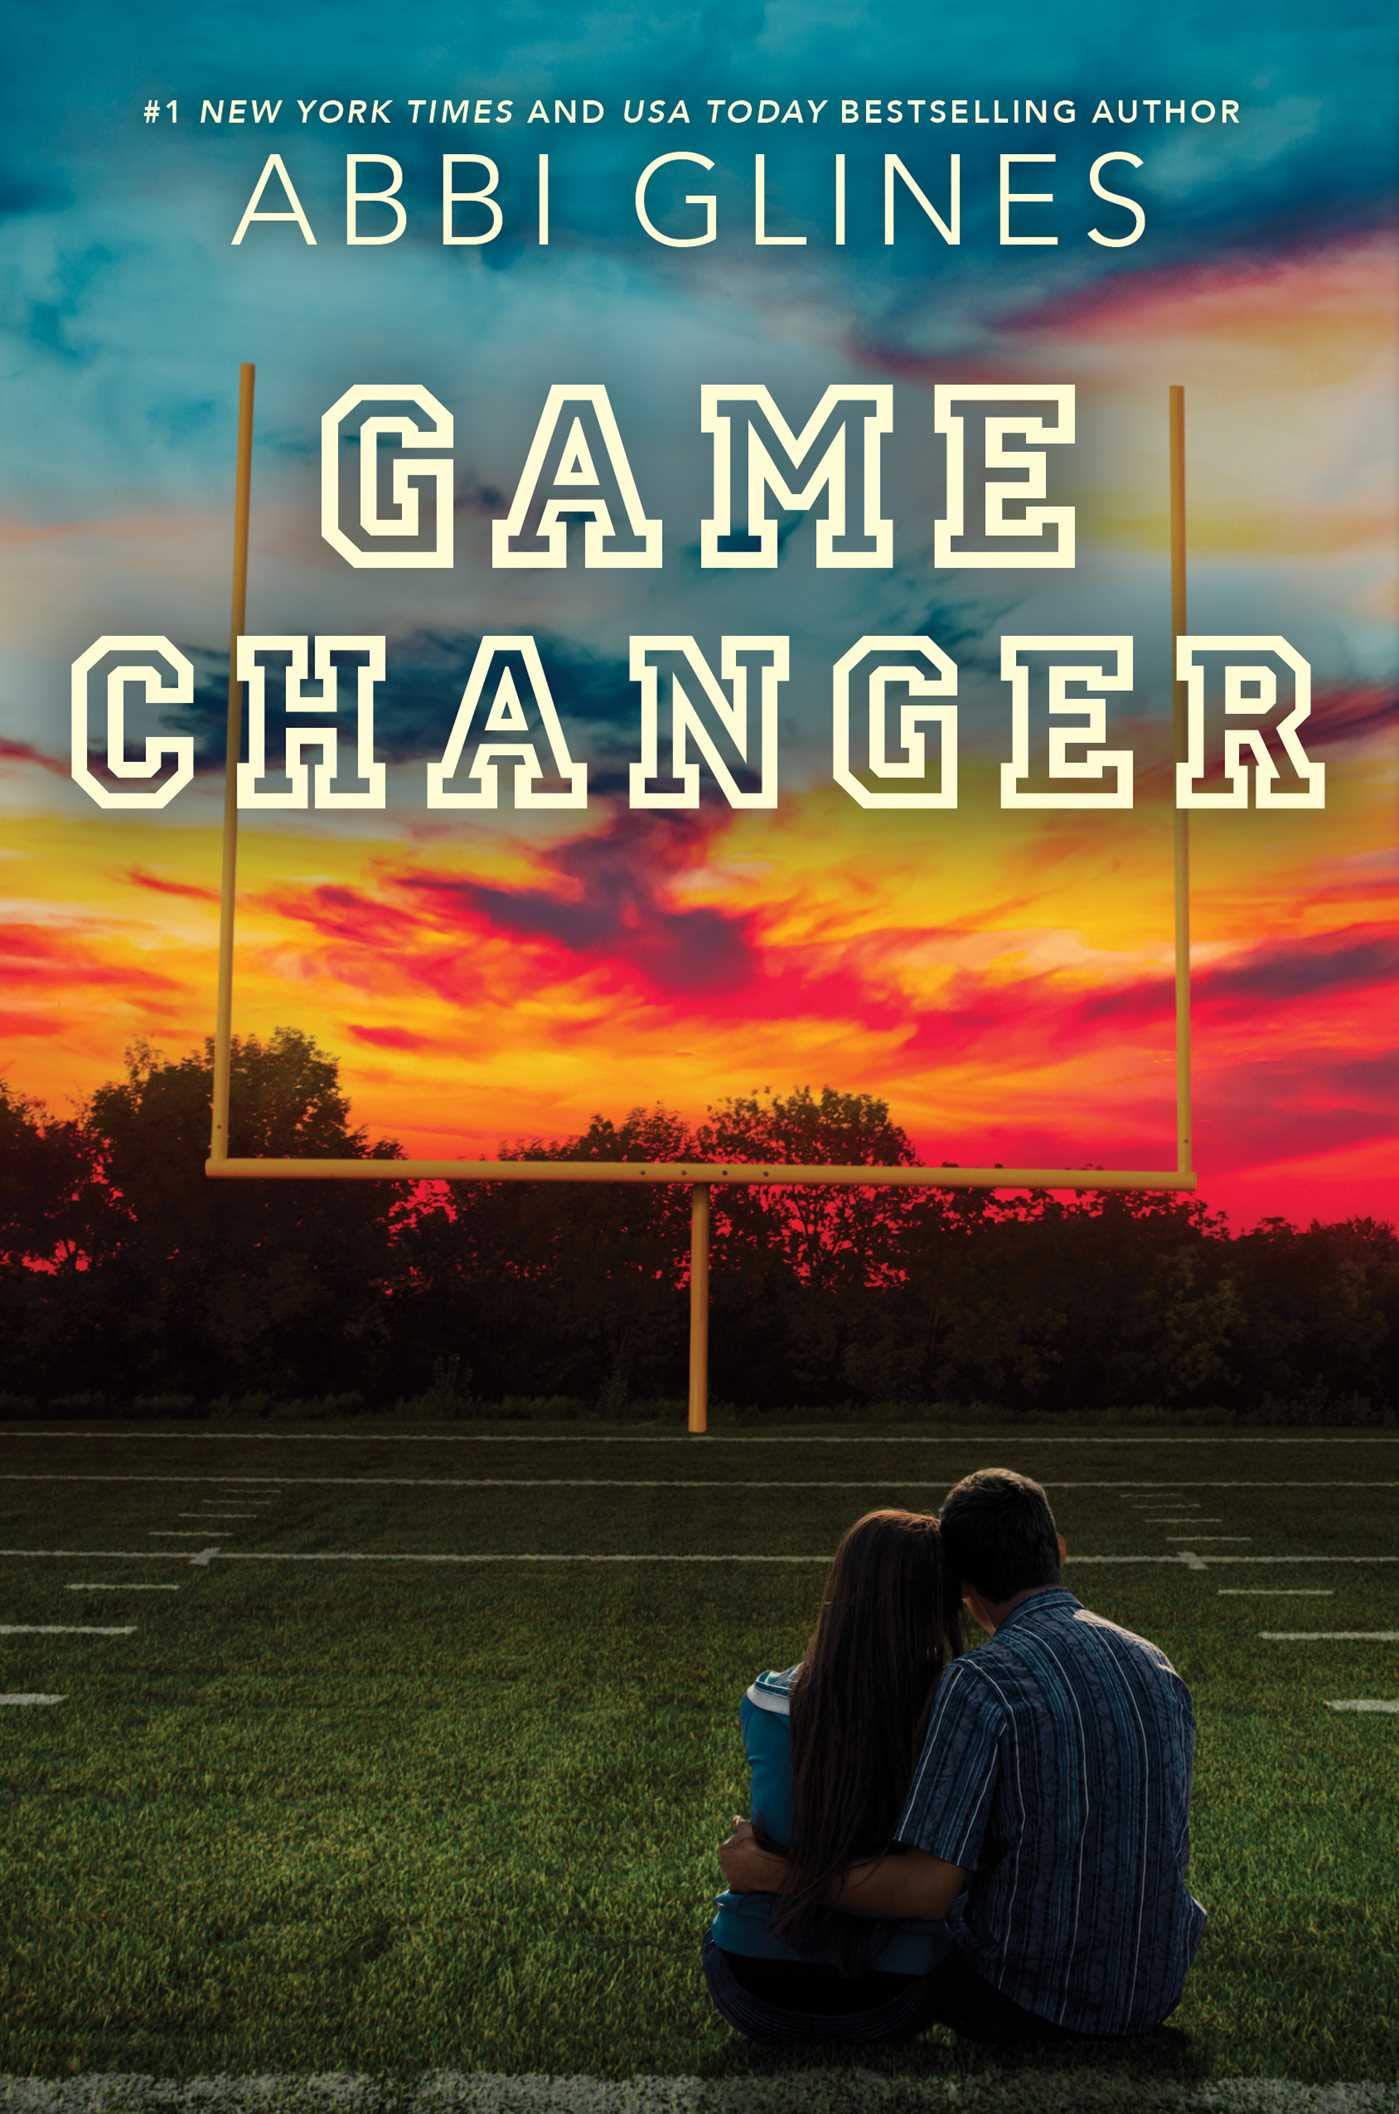 Cover of “Game Changer” by Abbi Glines